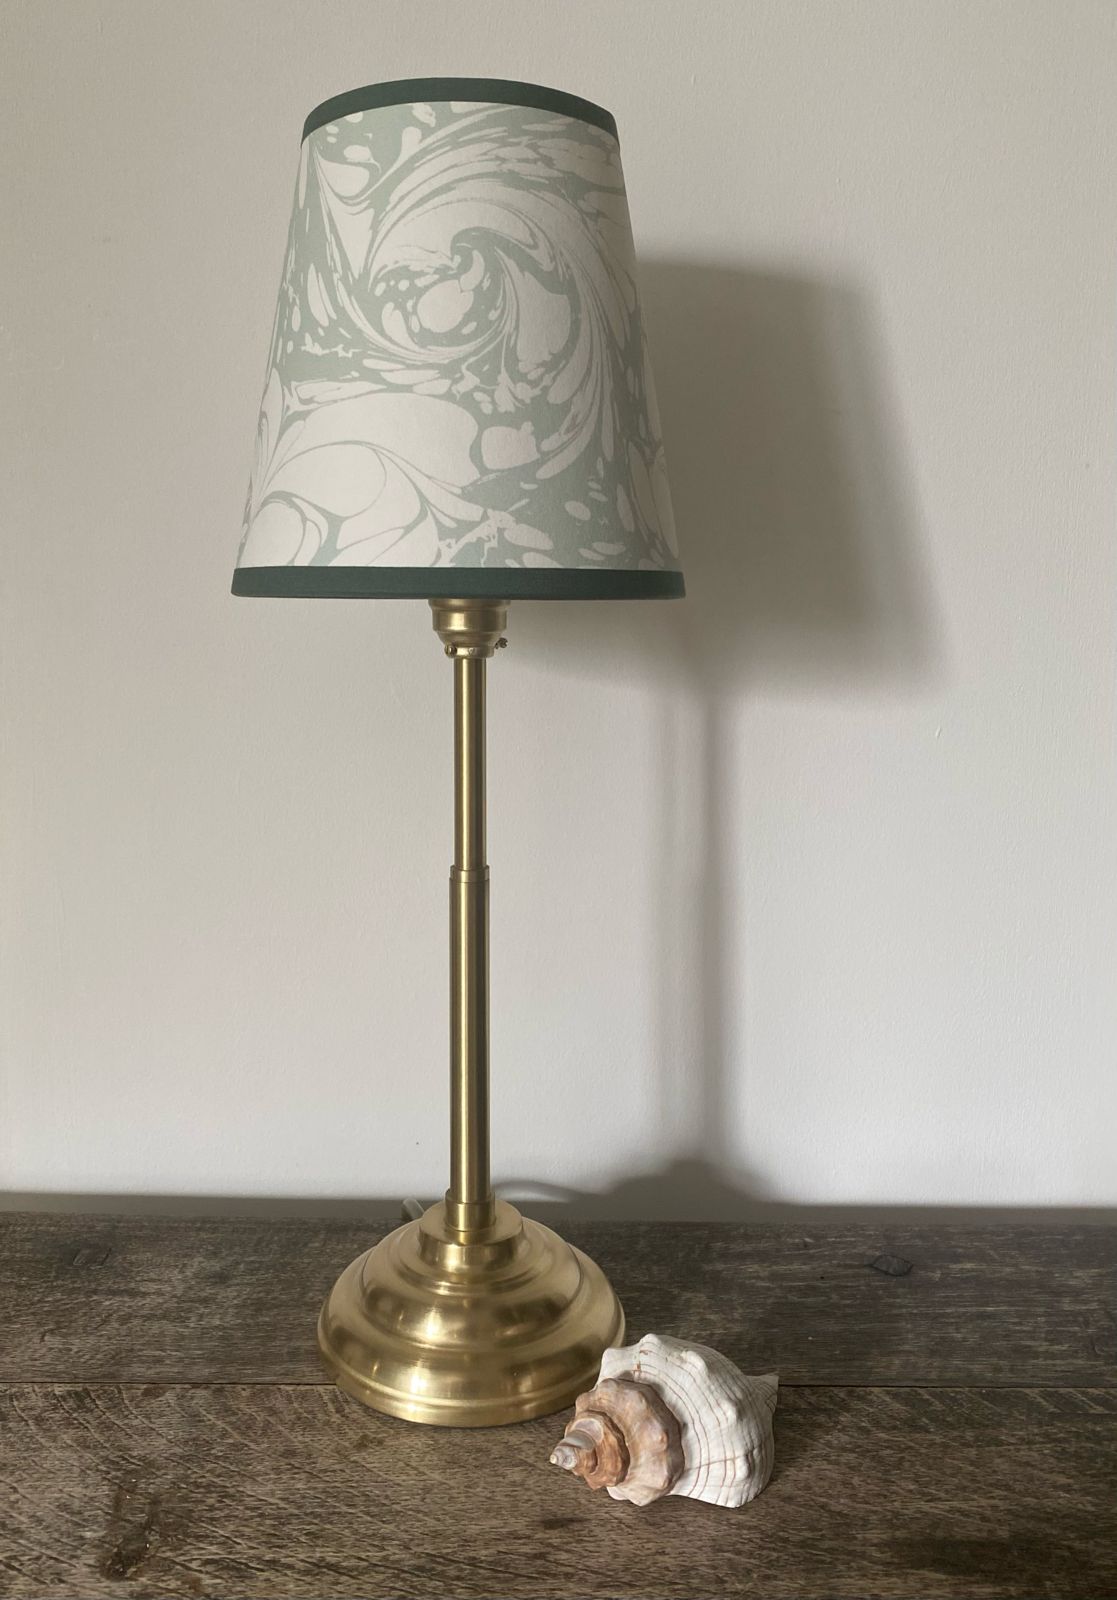 House of Amitié Marbled Paper Lampshade - Flourish Willow - Empire - Size Small - House of Amitiéproduct_type#LAM - WP - 005 - LBF